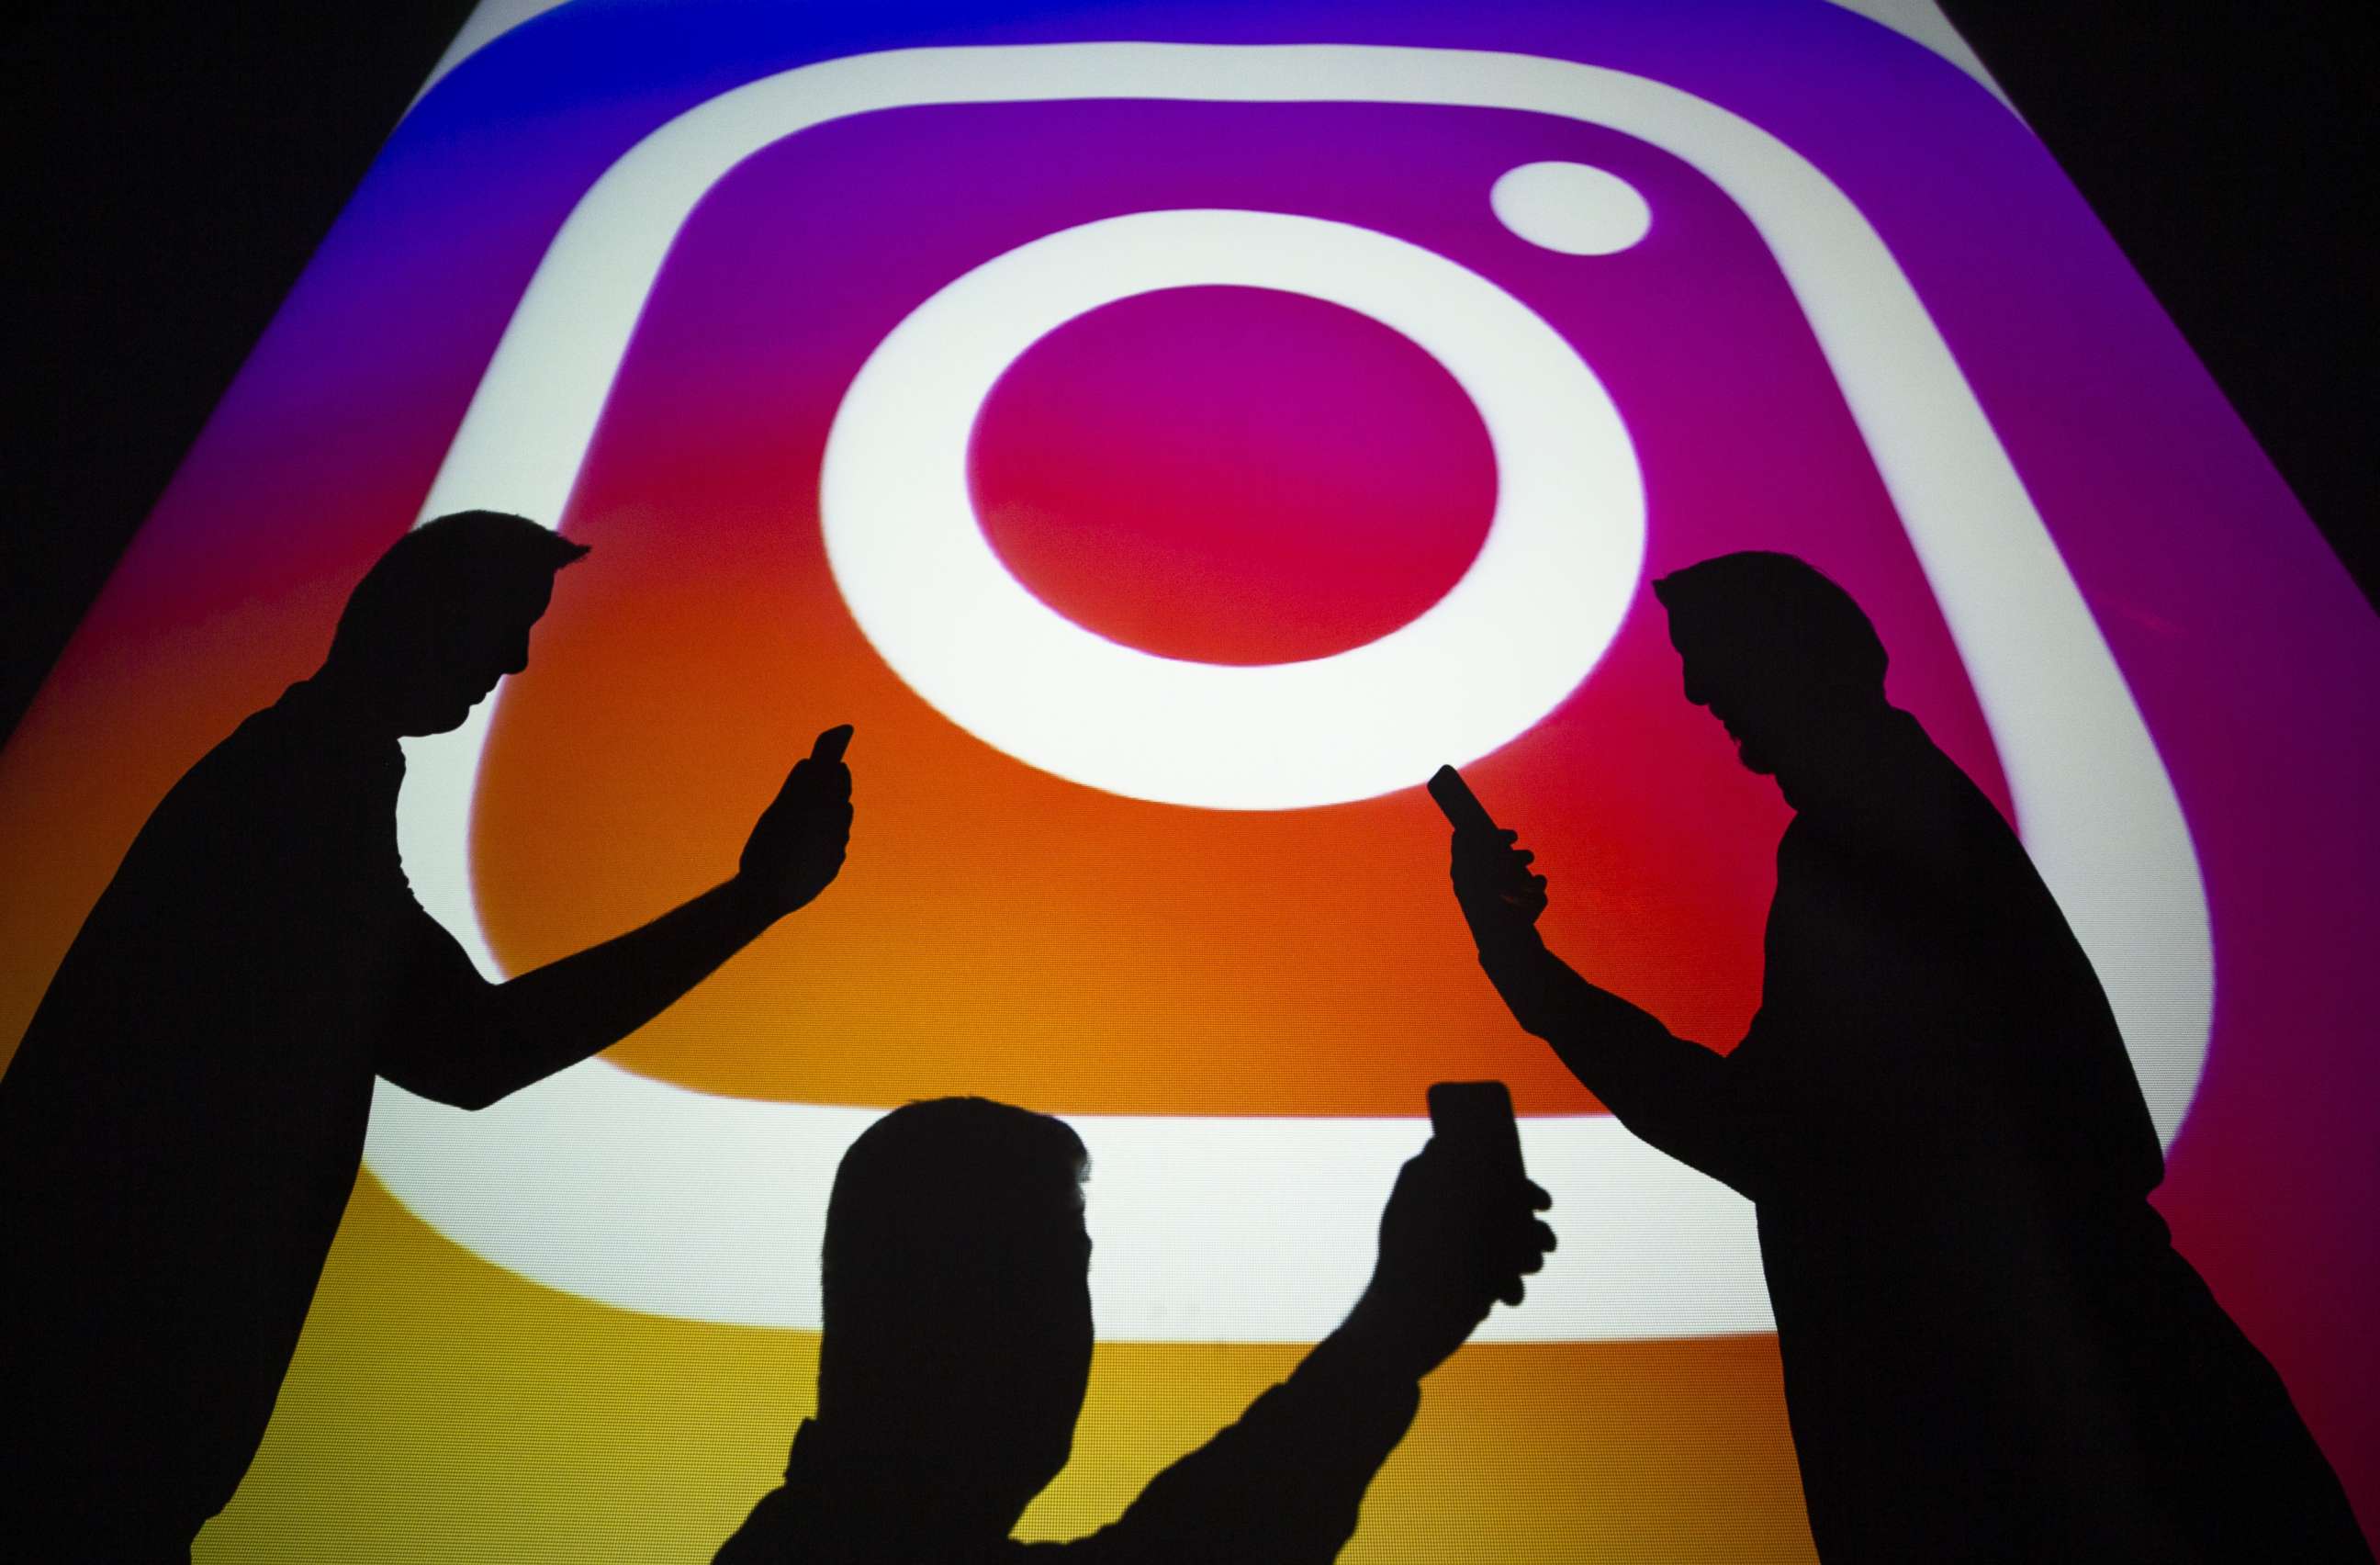 PHOTO: A photo shows silhouettes of men in front of the logo of 'Instagram' social media platform in Ankara, Turkey on September 25, 2018.